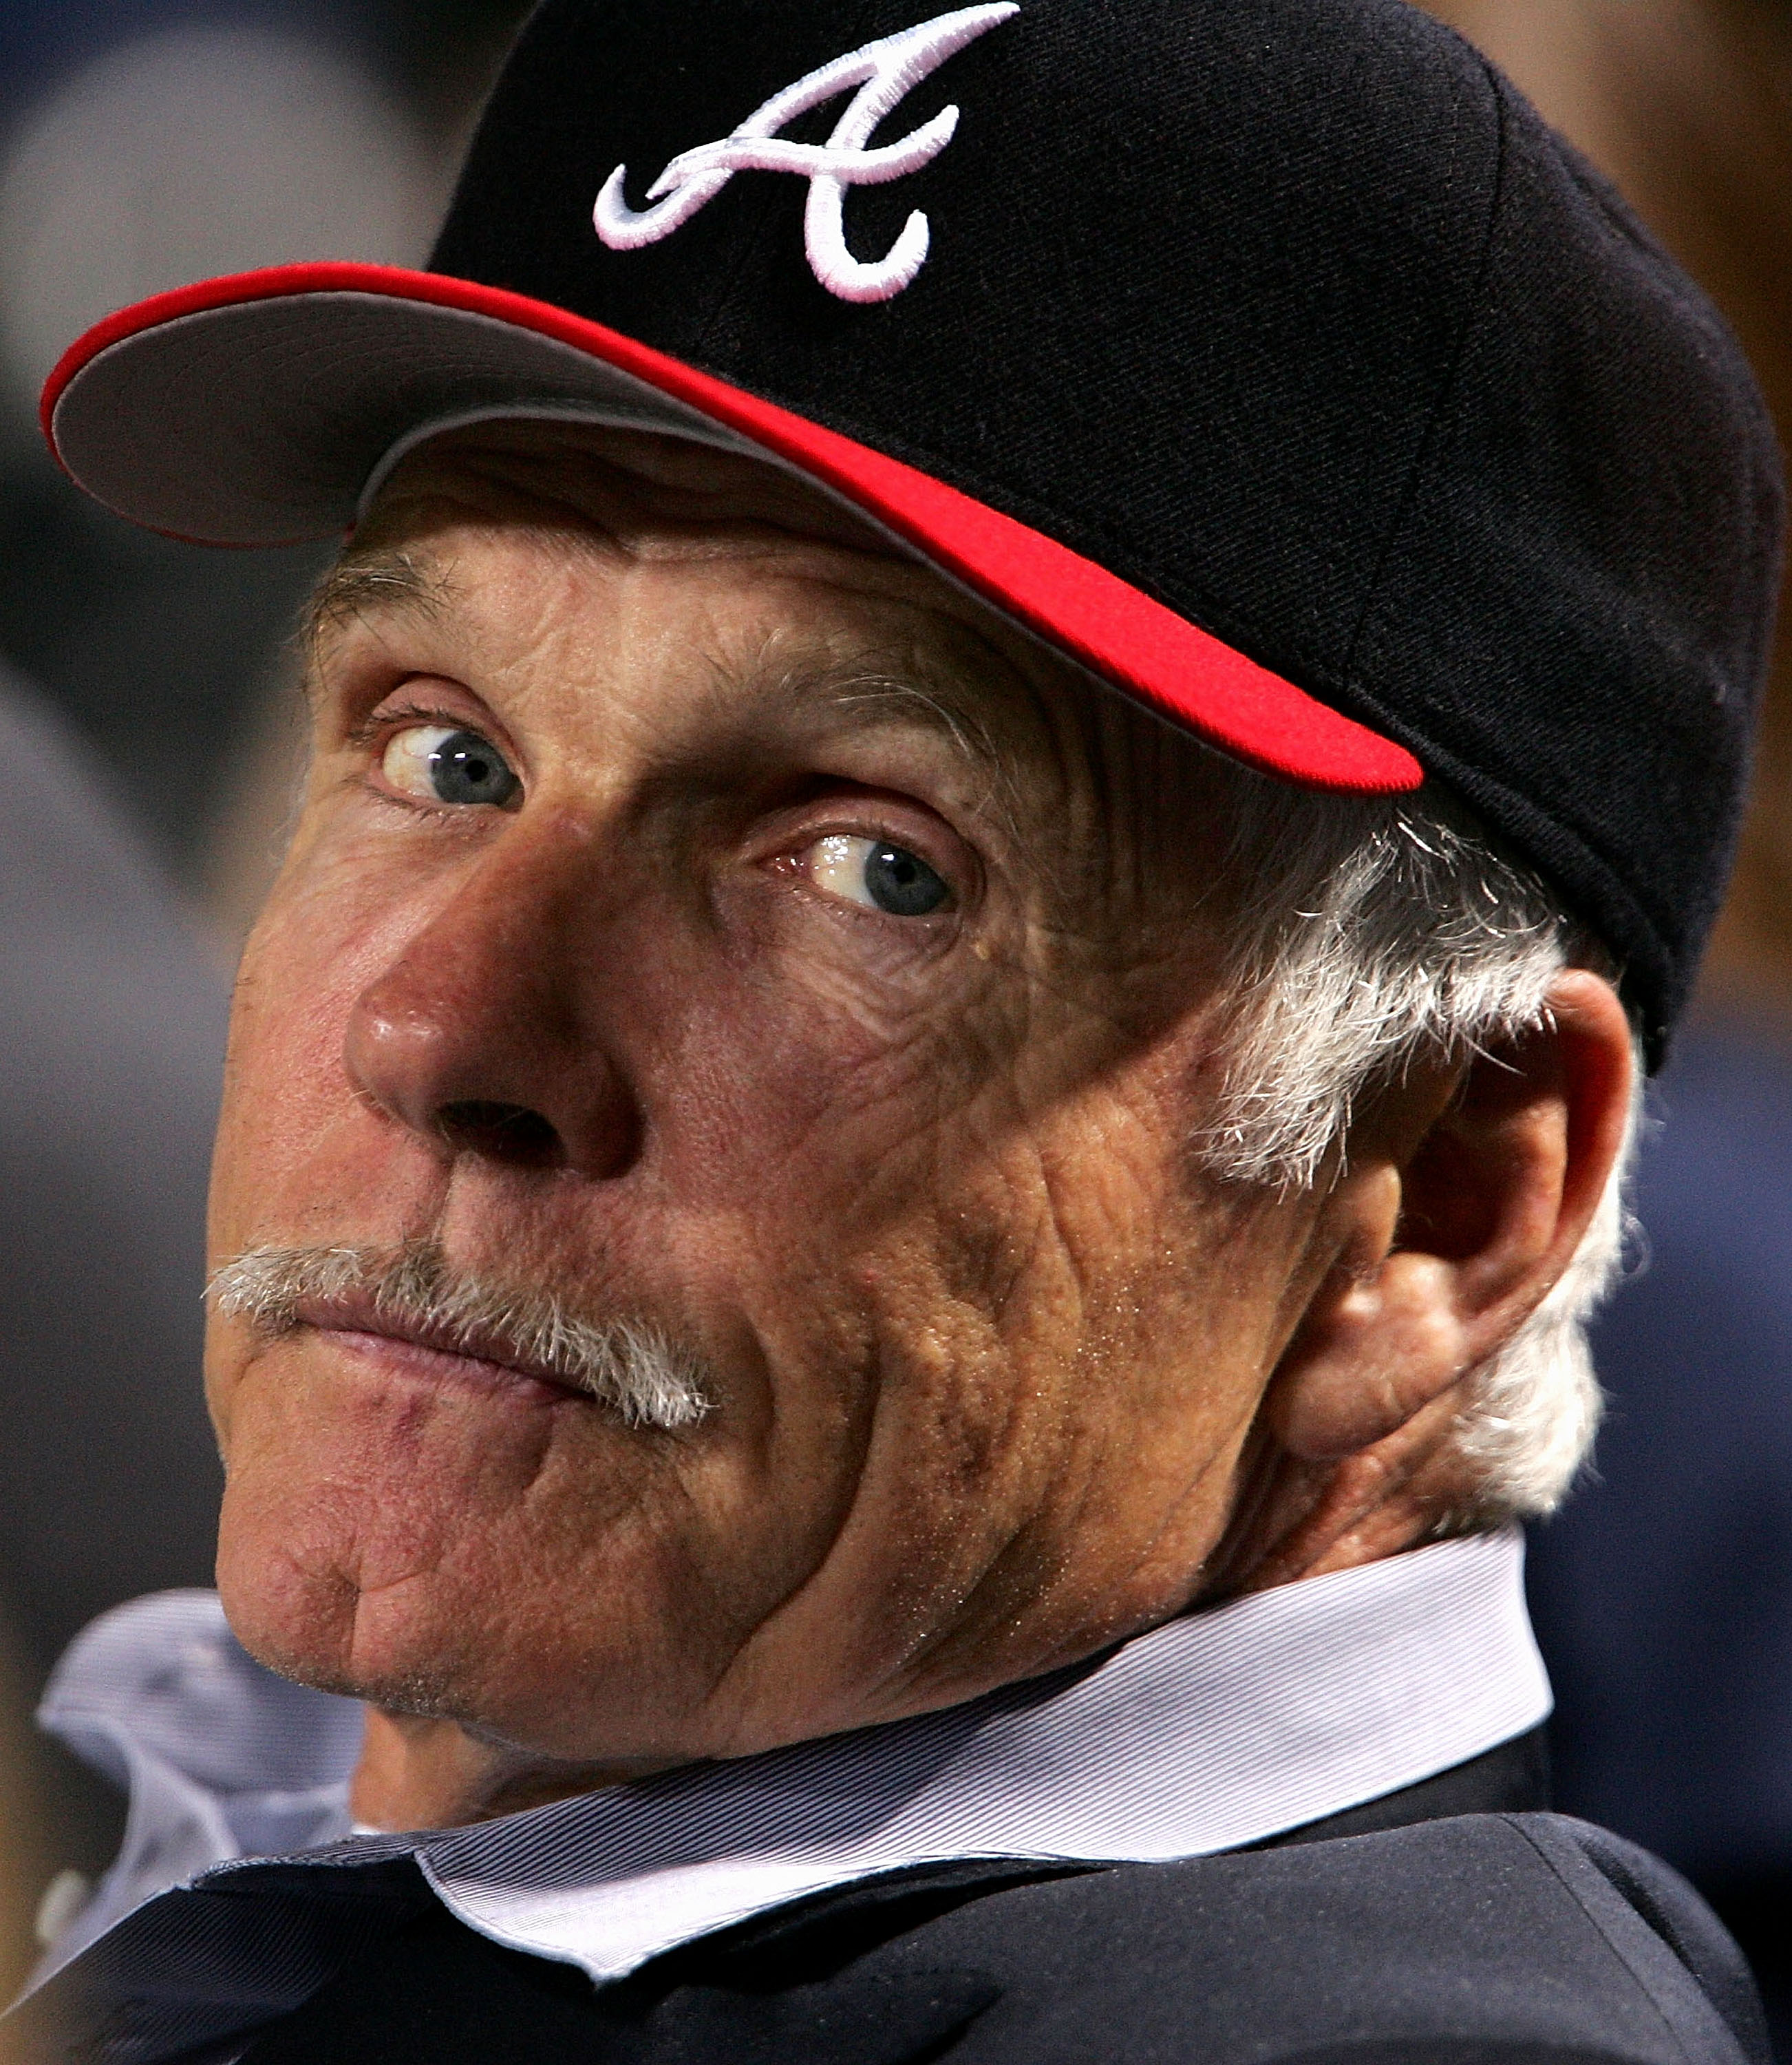 ATLANTA - OCTOBER 11:  Ted Turner, former owner of the Atlanta Braves, watches game five of the National League Division Series against the Houston Rockets on October 11, 2004 at Turner Field in Atlanta, Georgia.  (Photo by Doug Pensinger/Getty Images)